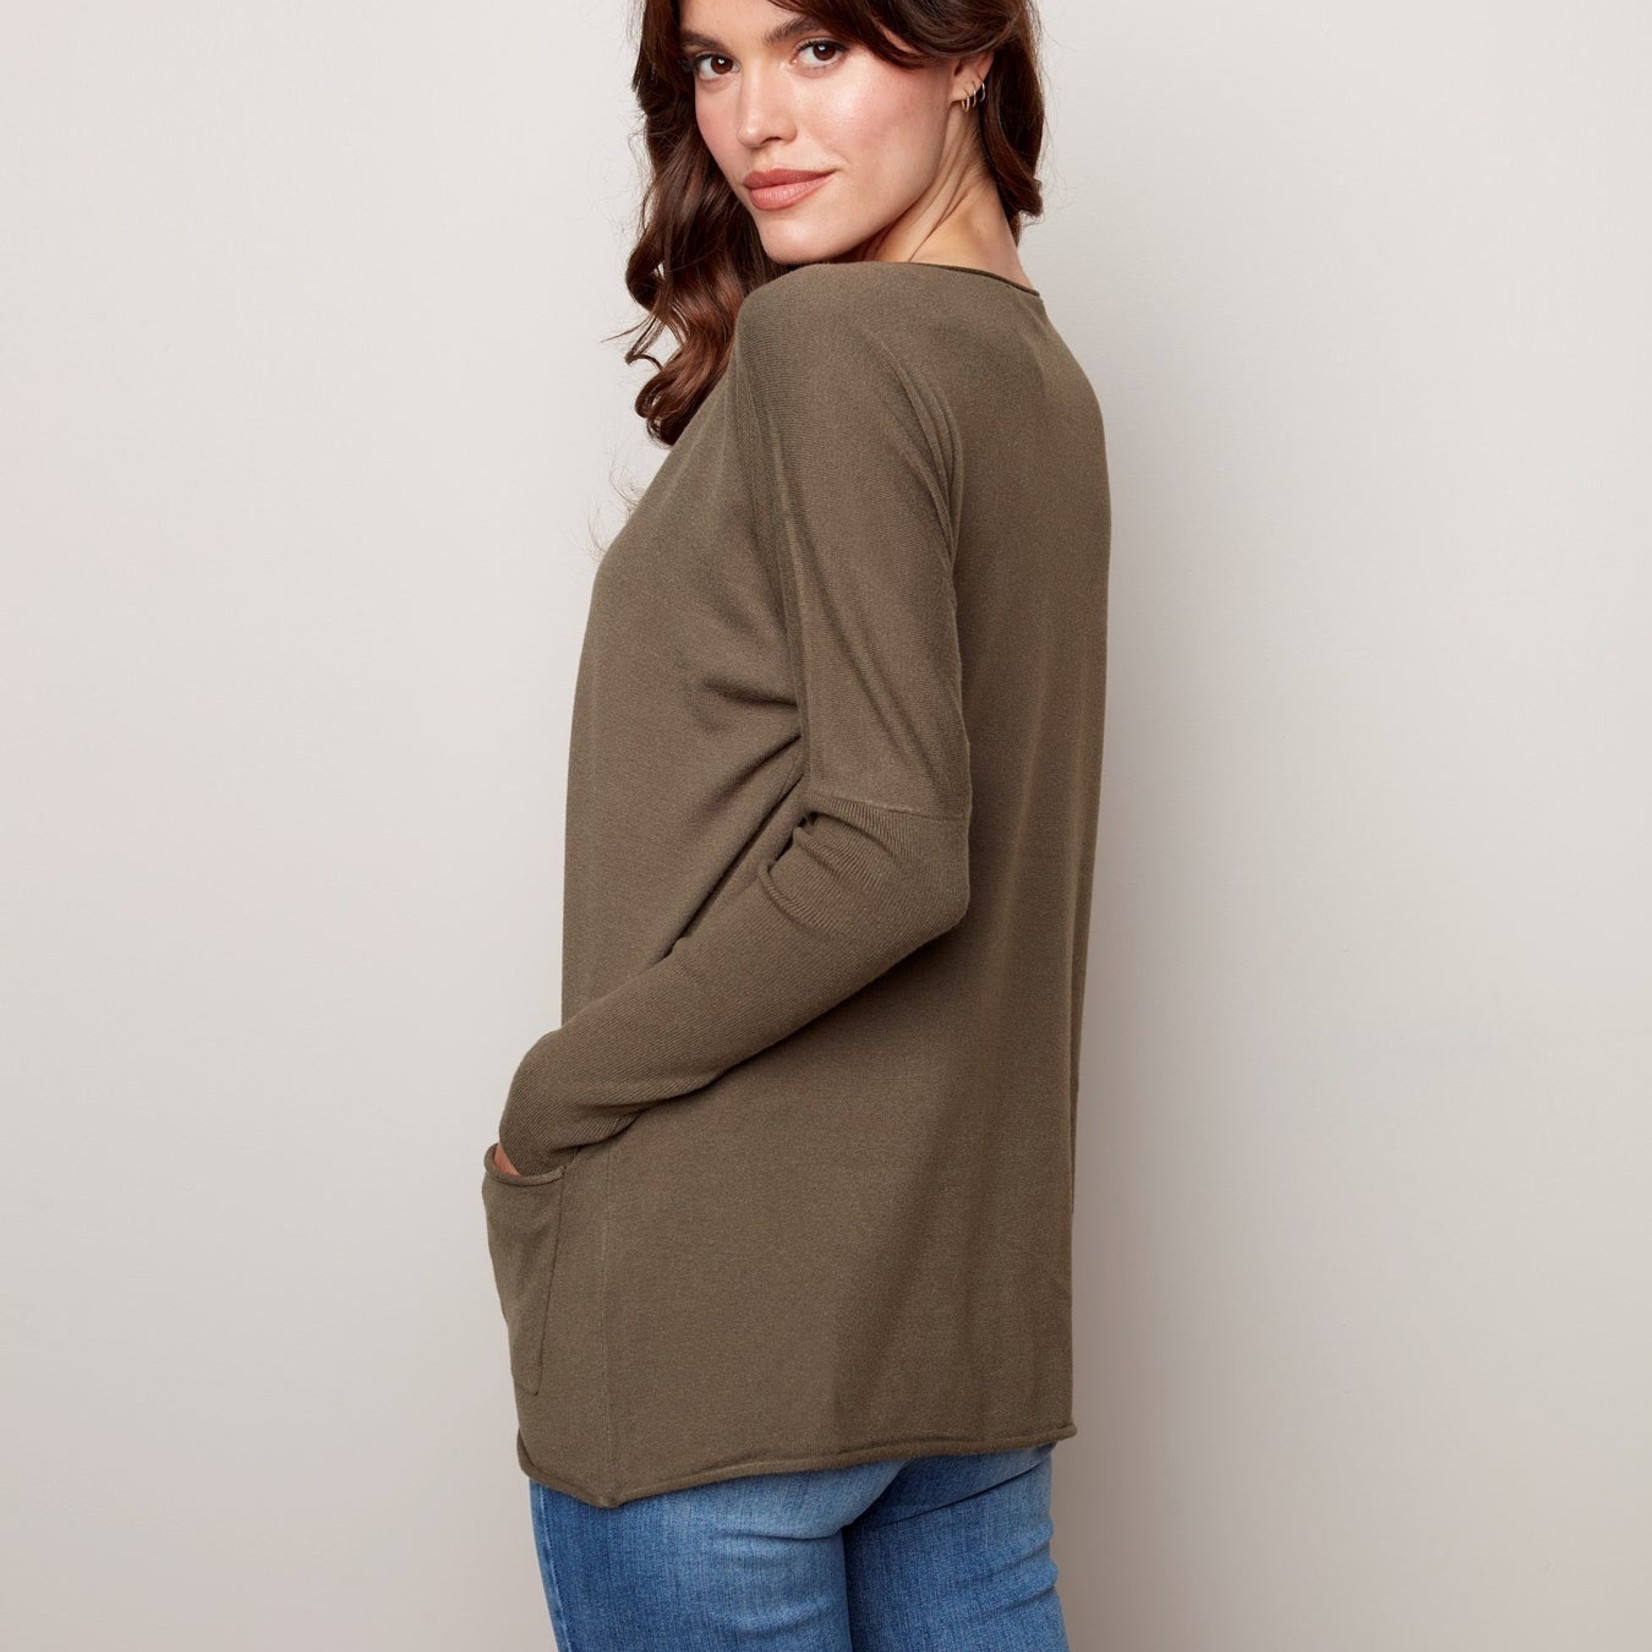 Charlie B Plush Knit Sweater with Overlap Detail - Pine